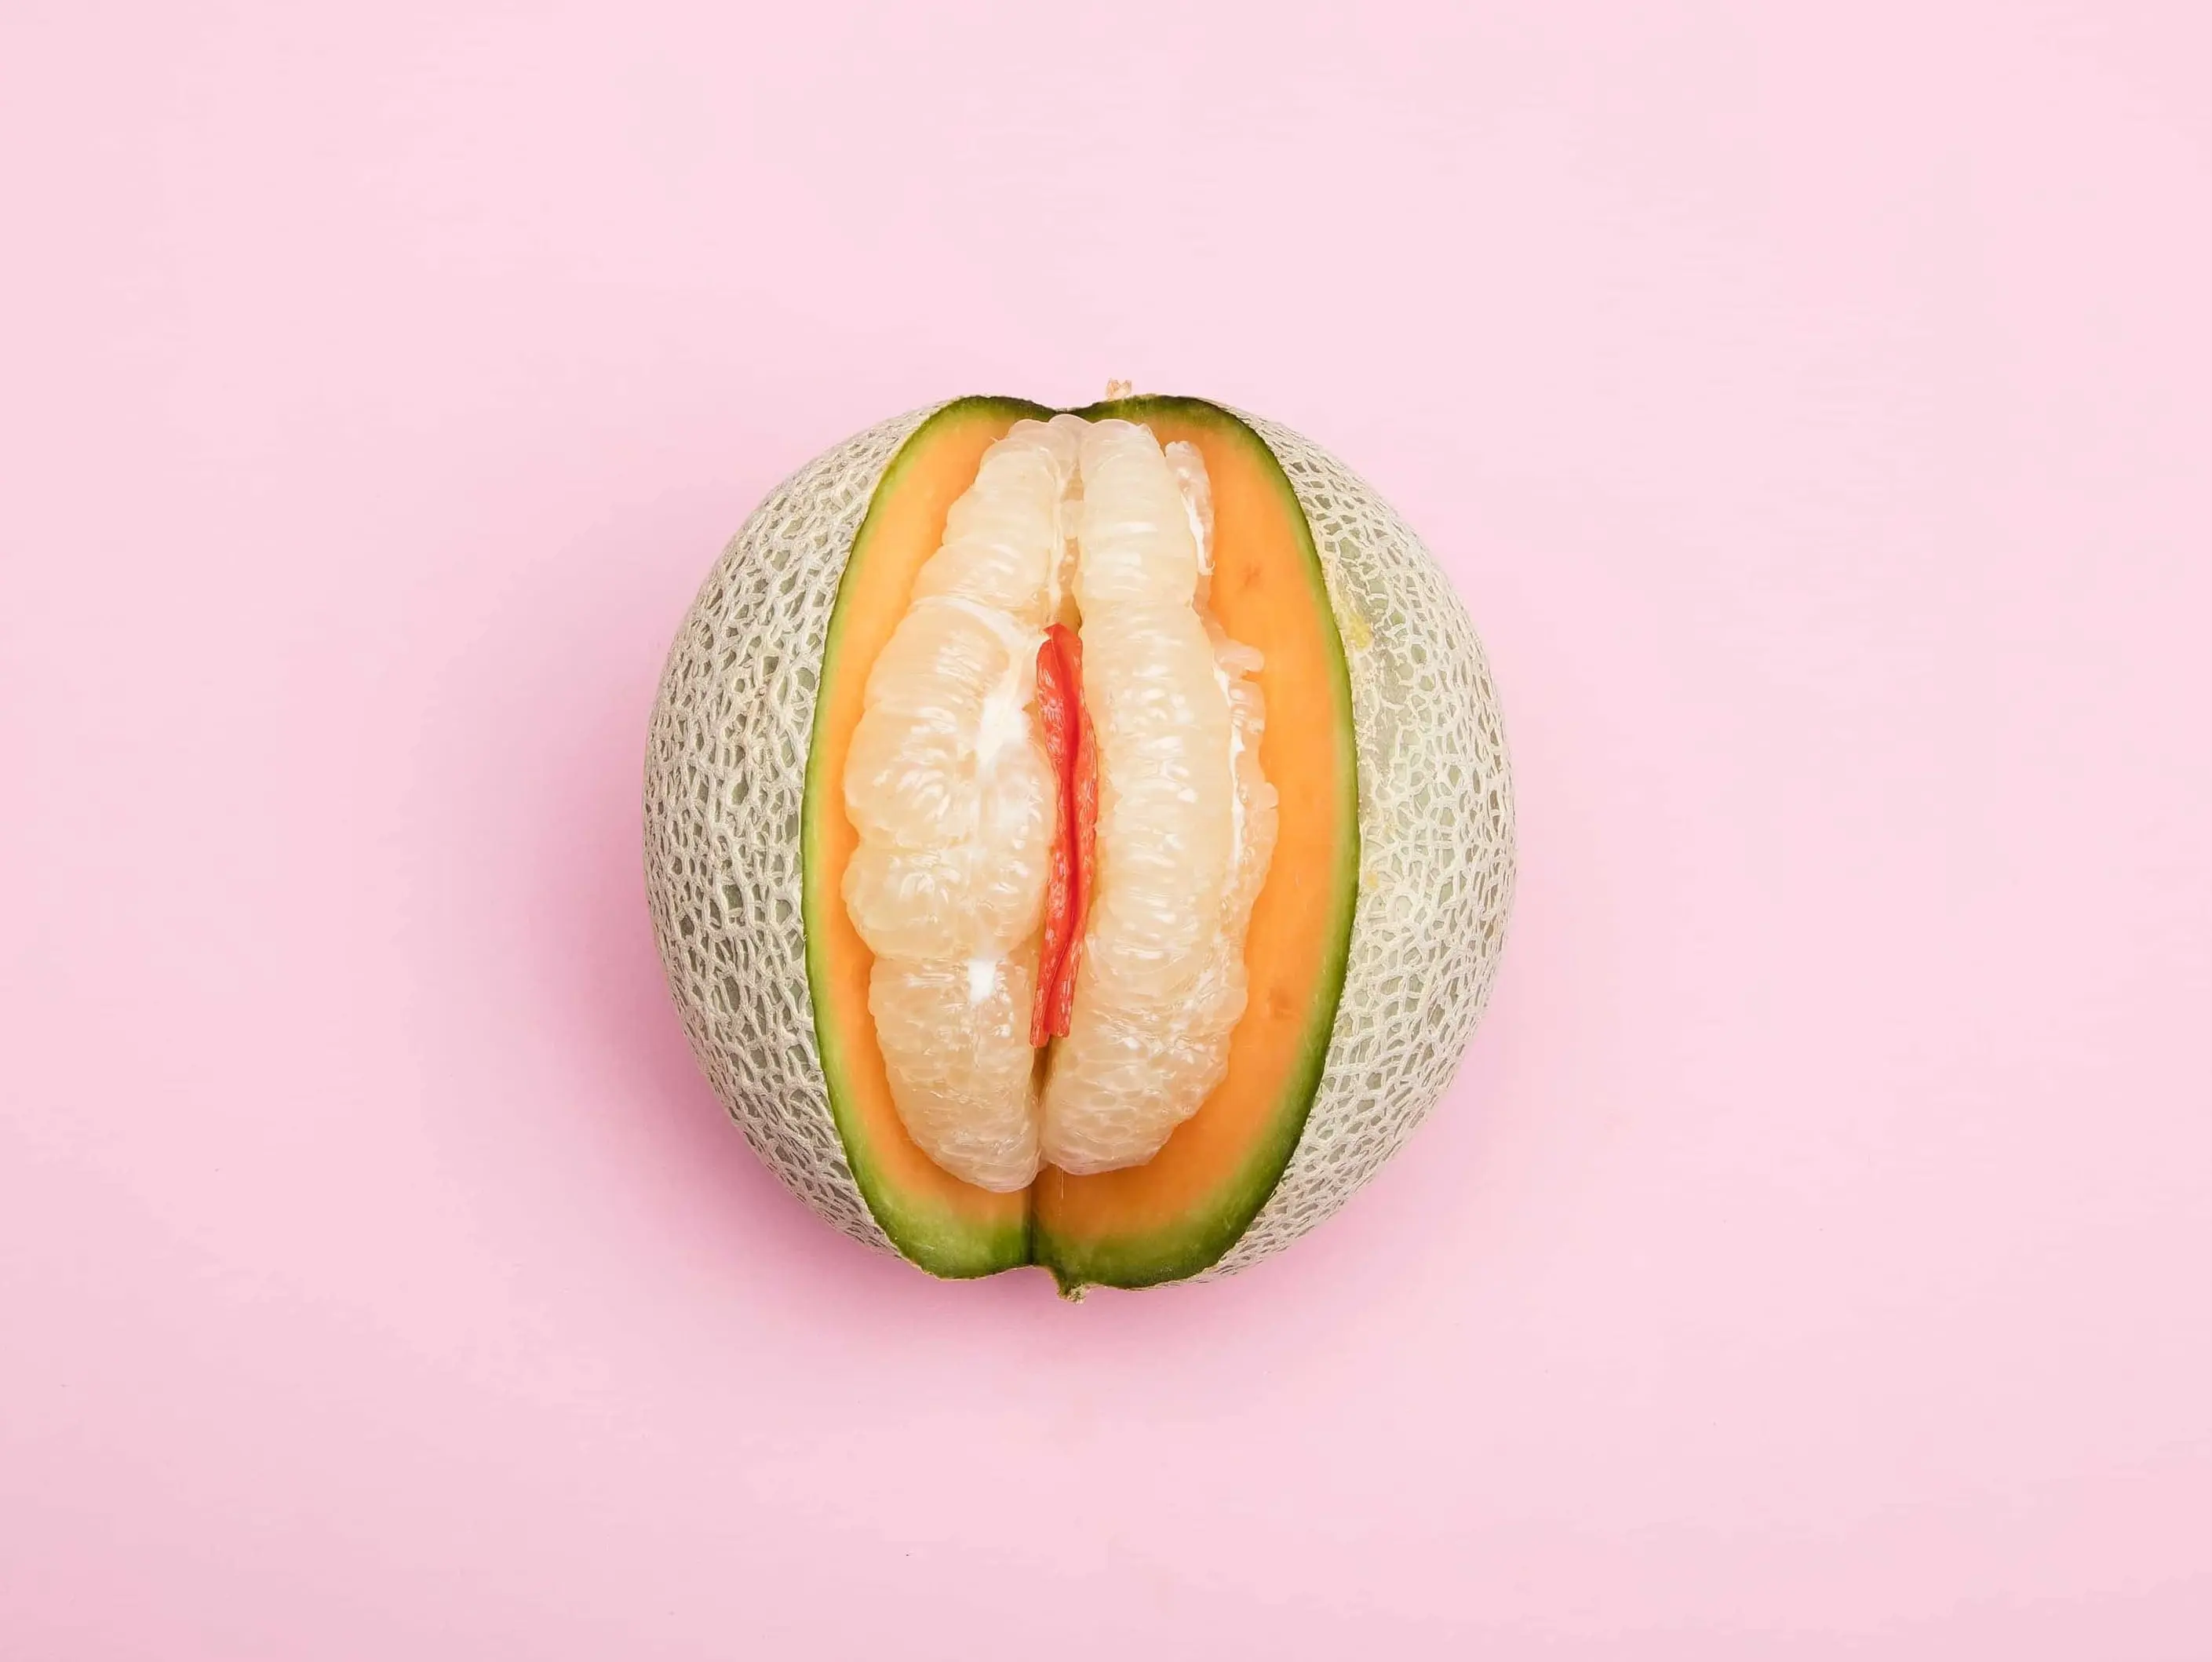 Picture of a melon on a pink background